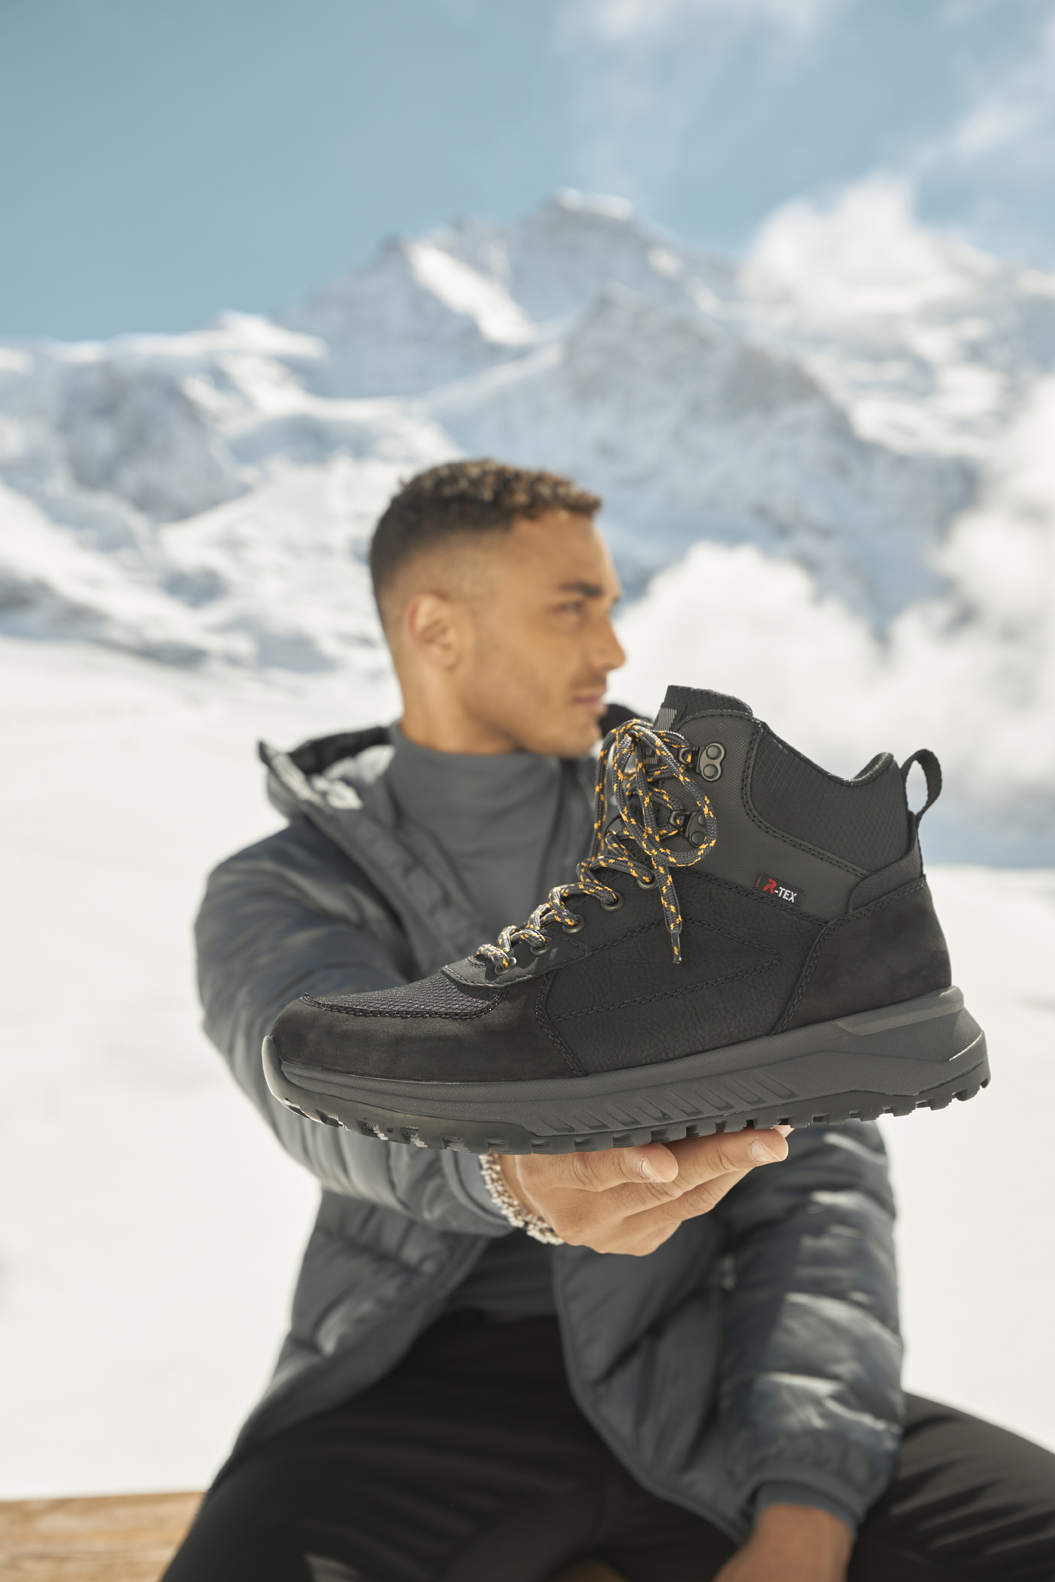 [Translate to Englisch (USA):] Black R-EVOLUTION boots by Rieker made of synthetic leather with zipper, extra soft and removable insole and super light and flexible outsole. Matching the shoes, the dark-haired man is wearing black jeans with a grey turtleneck sweater, sunglasses and a grey vest while sitting on a bench in the snow.